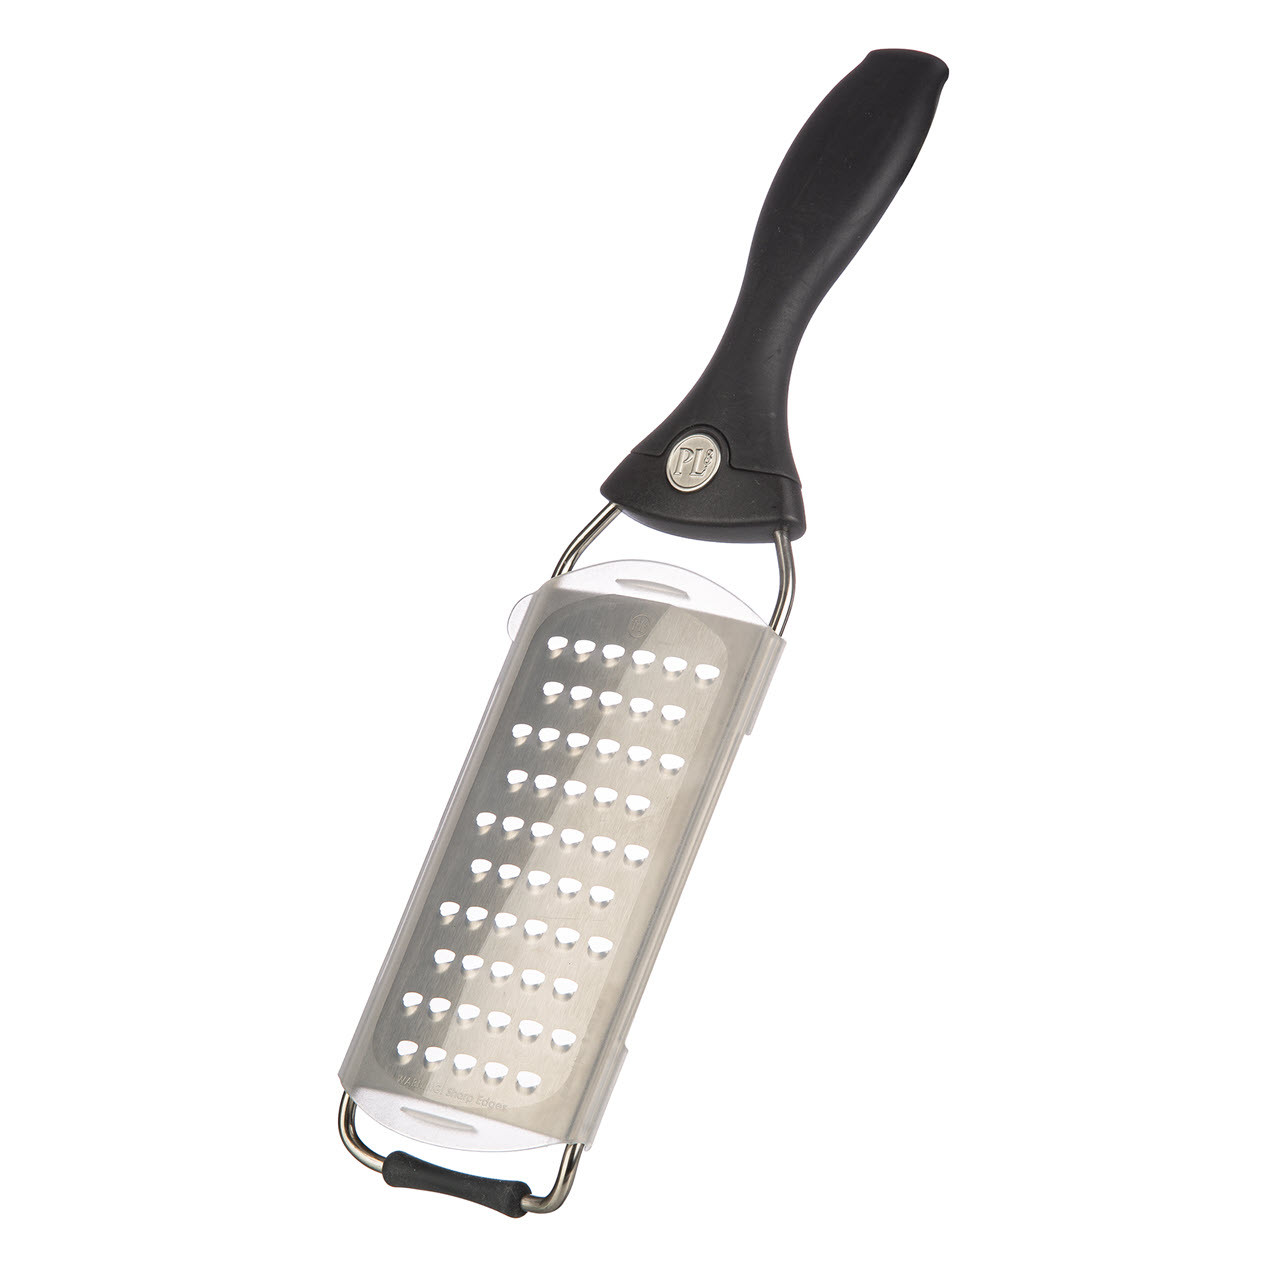 ENDURANCE CHEESE GRATER SET - The Peppermill